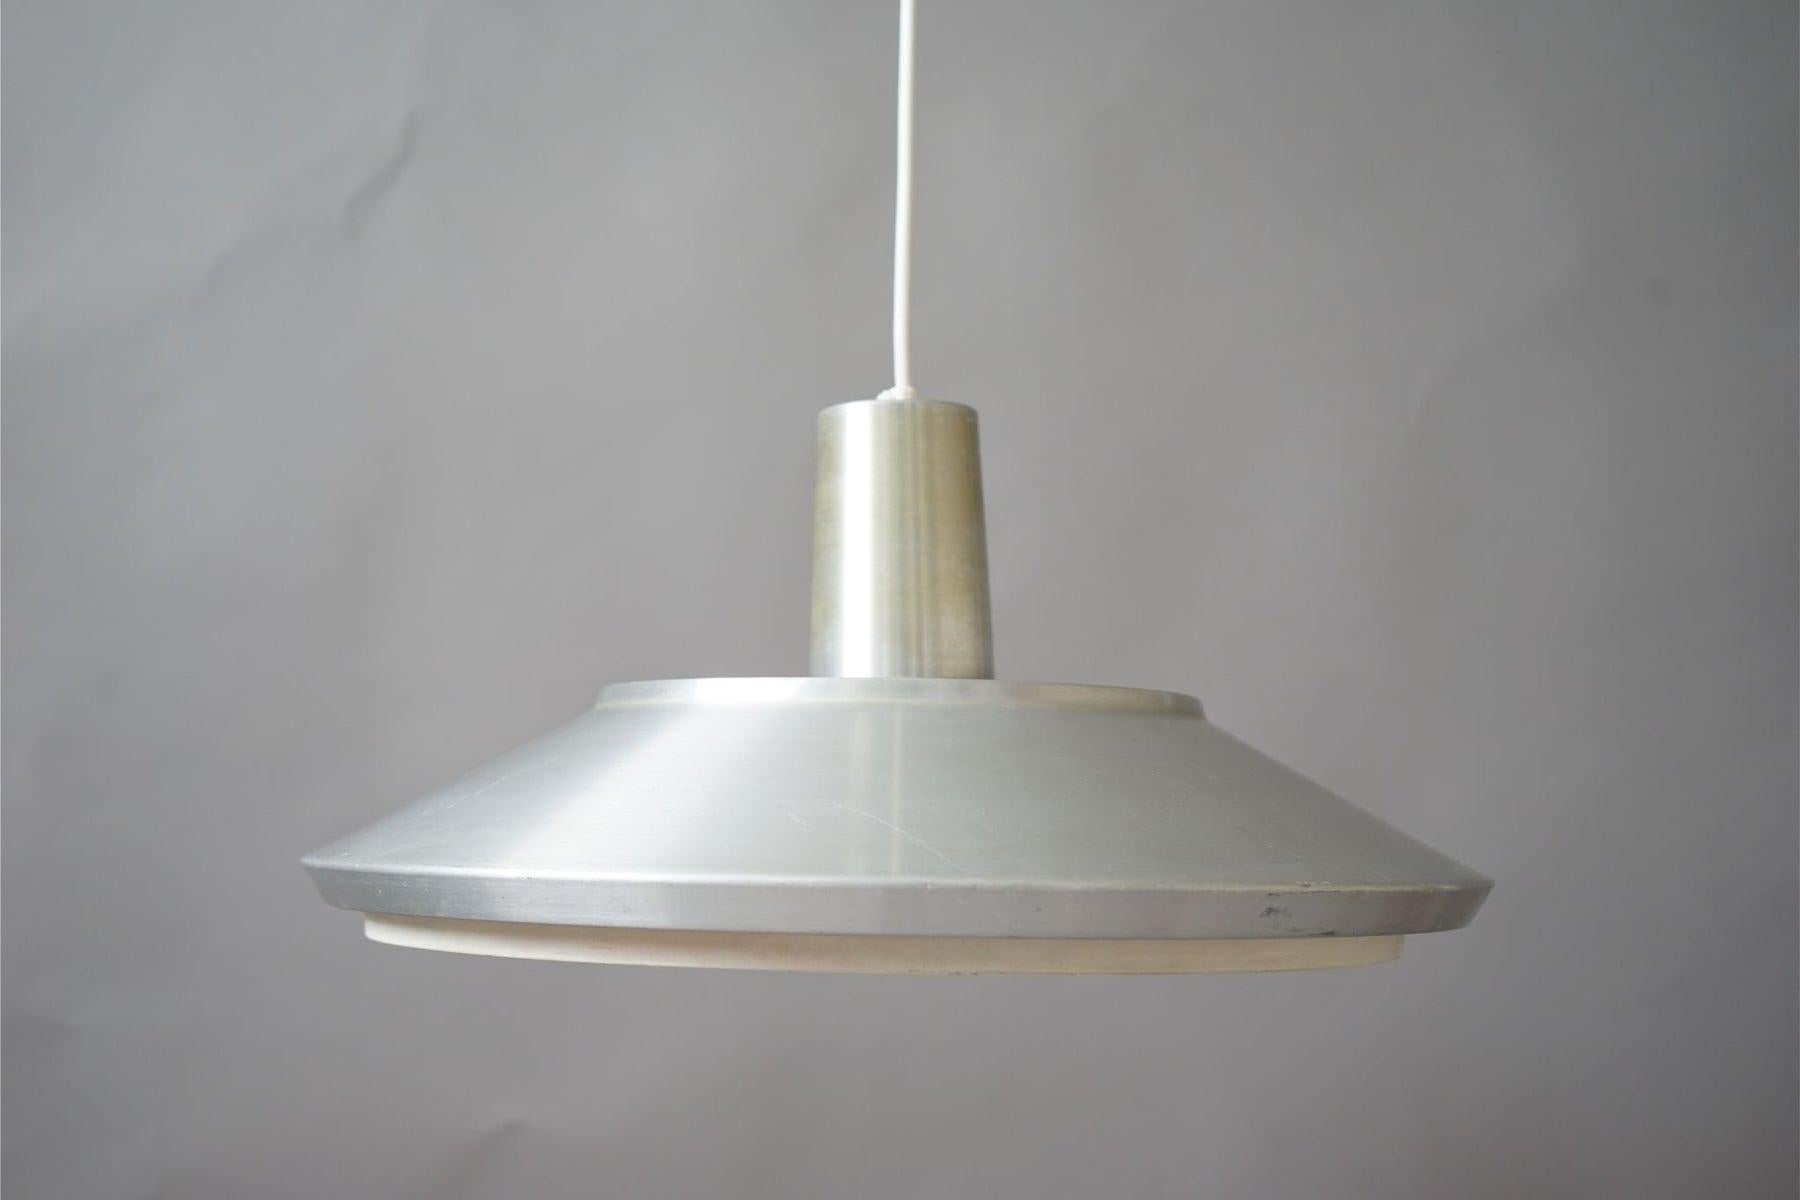 Metal mid century pendant light, circa 1960's. This light features metal shade with original diffuser. Small melted area of diffuser.

A classic Scandinavian design to brighten up any area of your home.